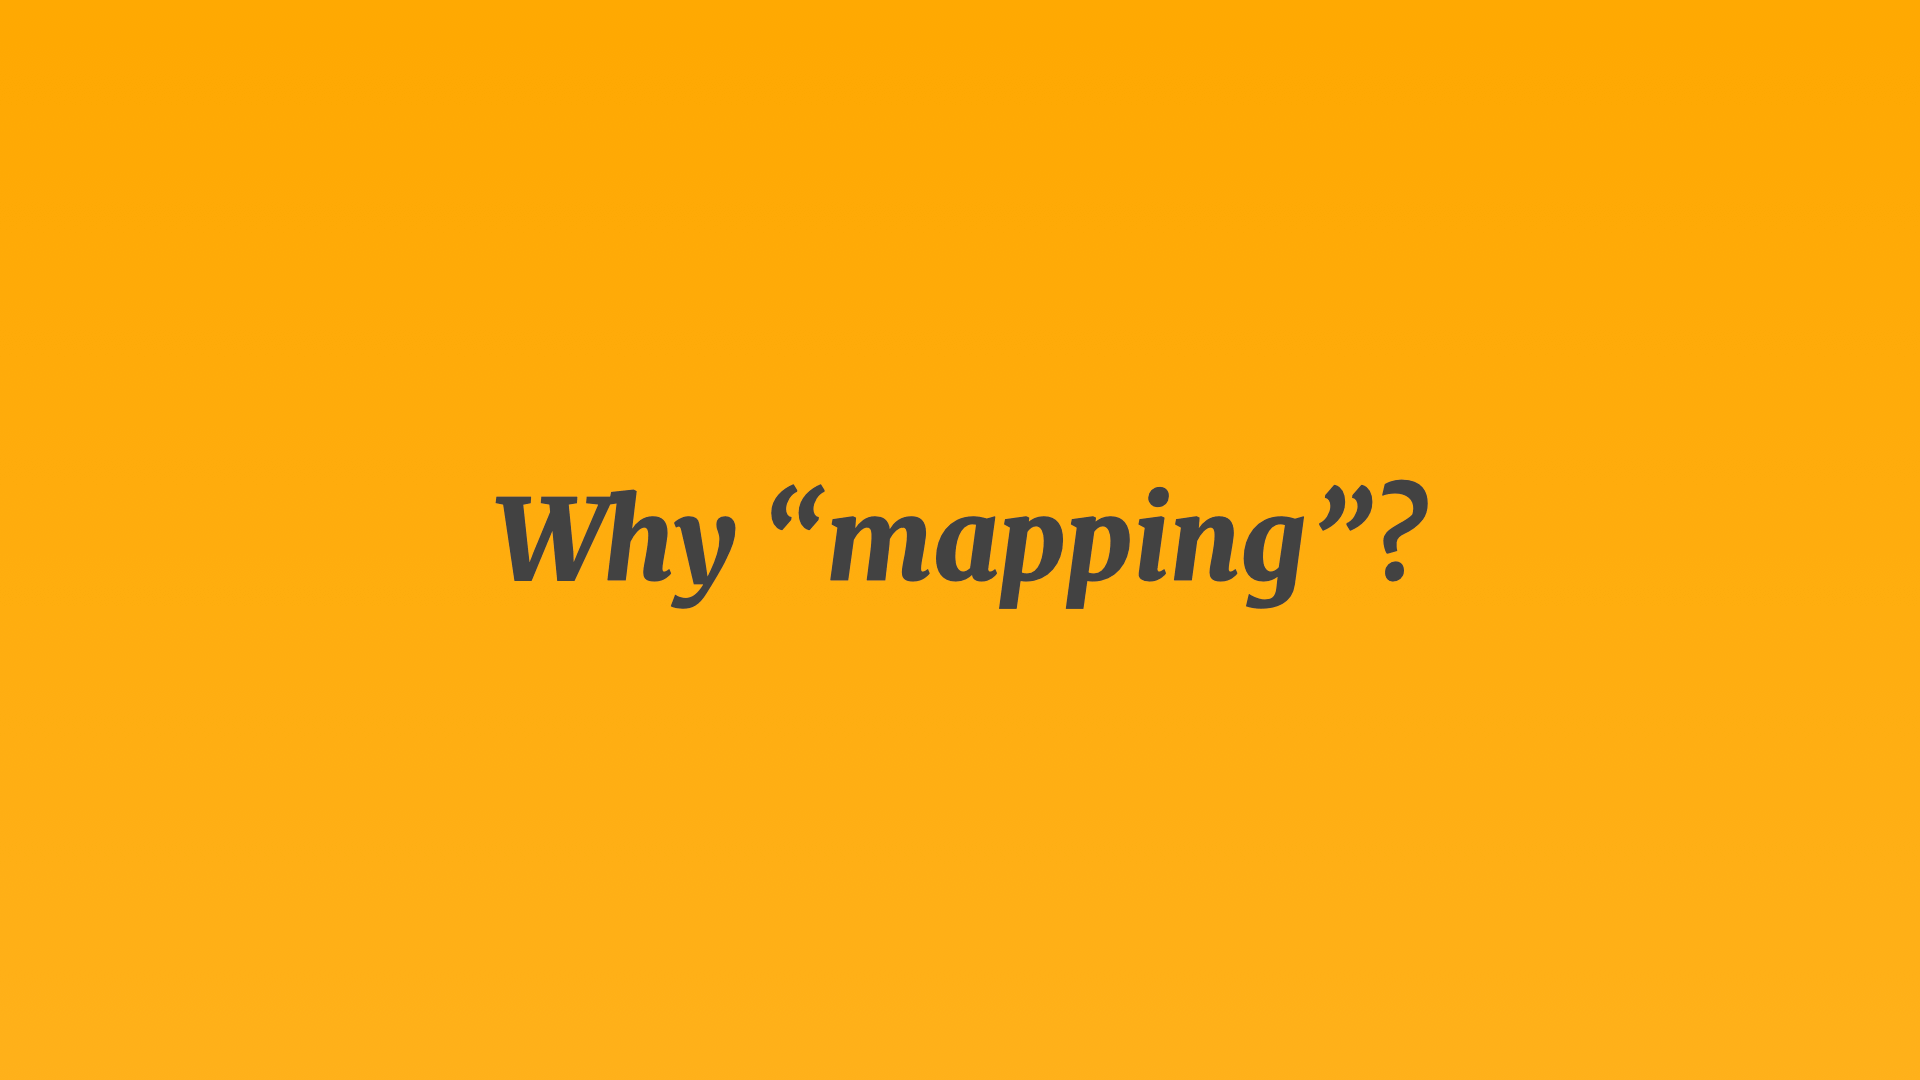 Text title: Why mapping?